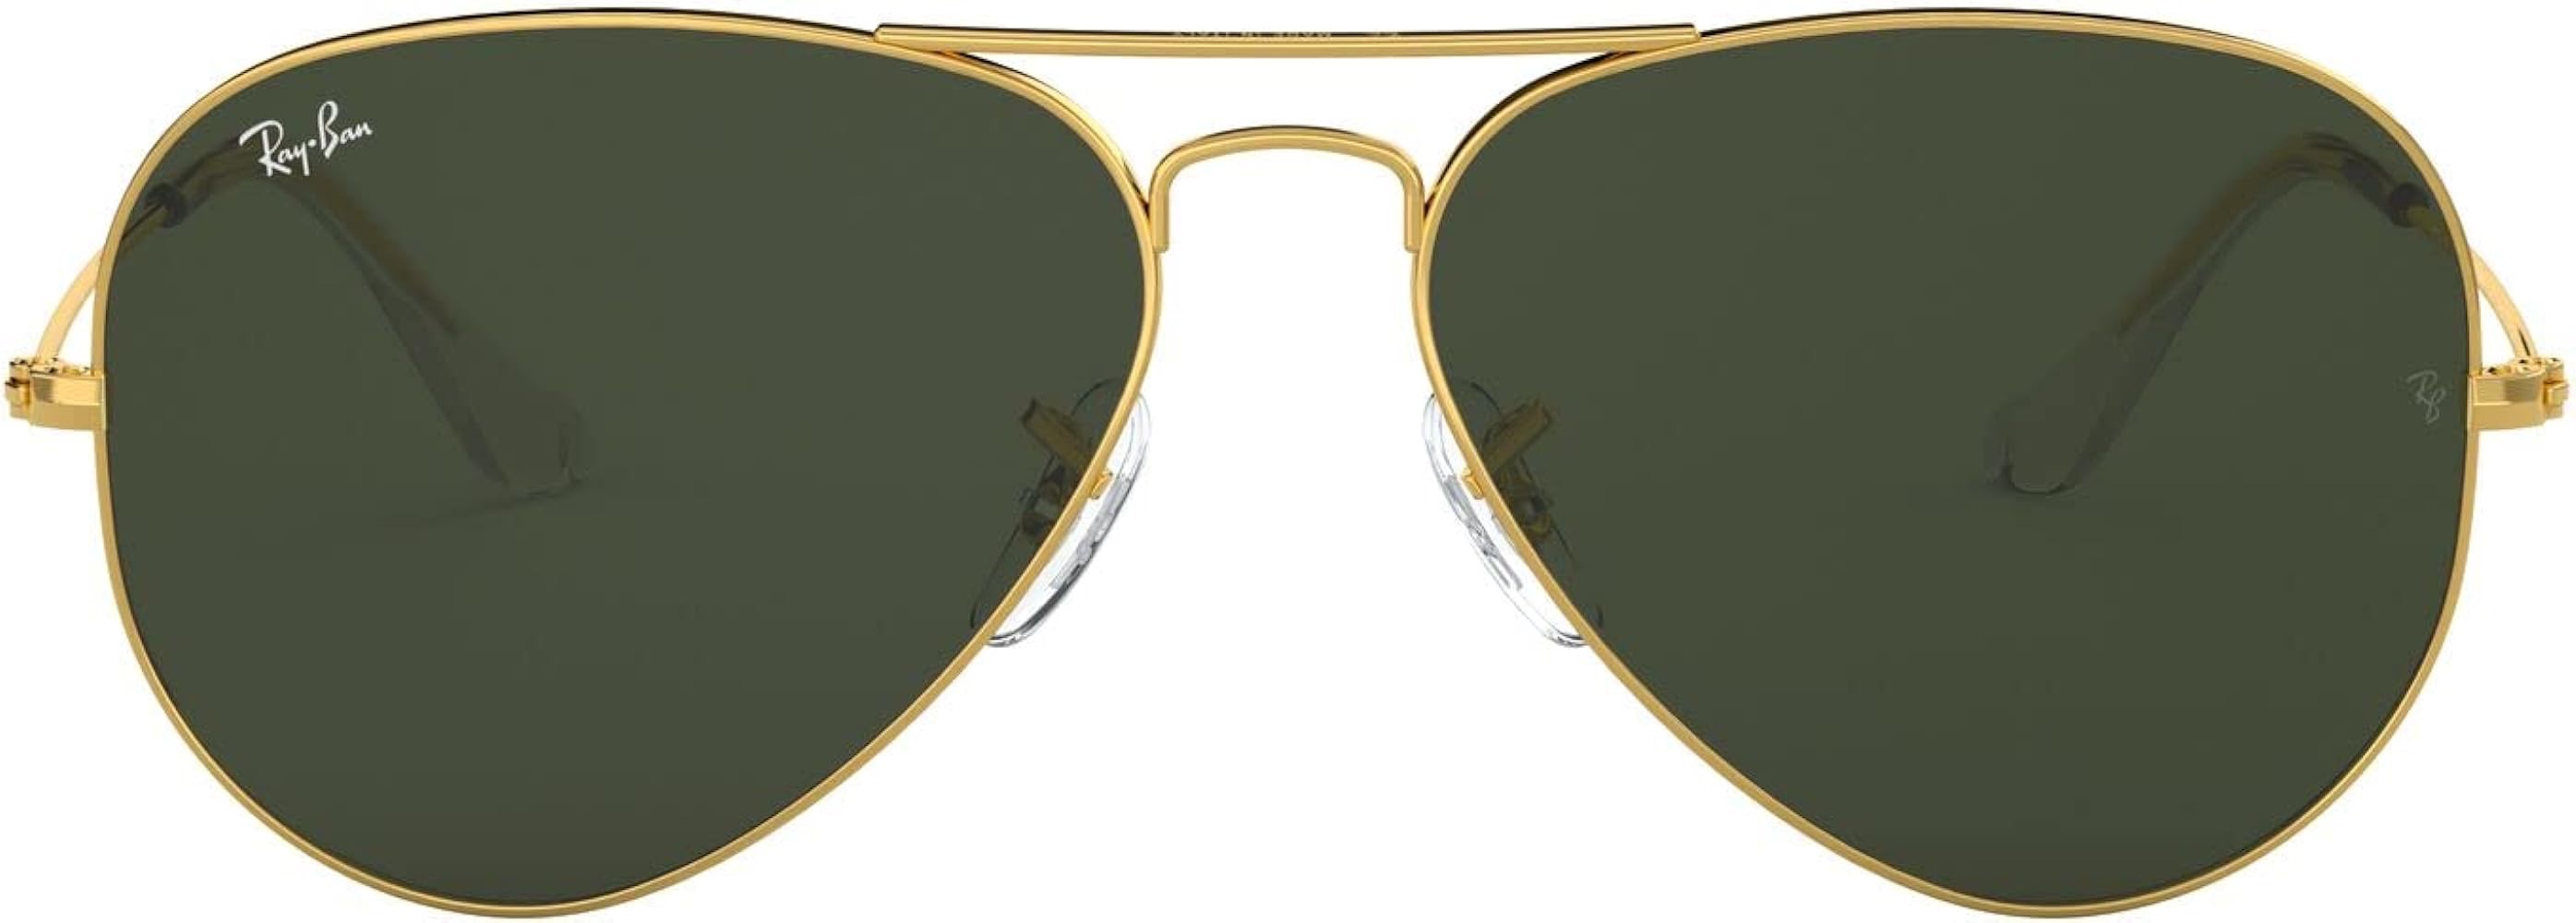 Amazon.com: Ray-Ban RB3025 Classic Aviator Sunglasses, Gold/G-15 Green, 62 mm : Clothing, Shoes & Jewelry